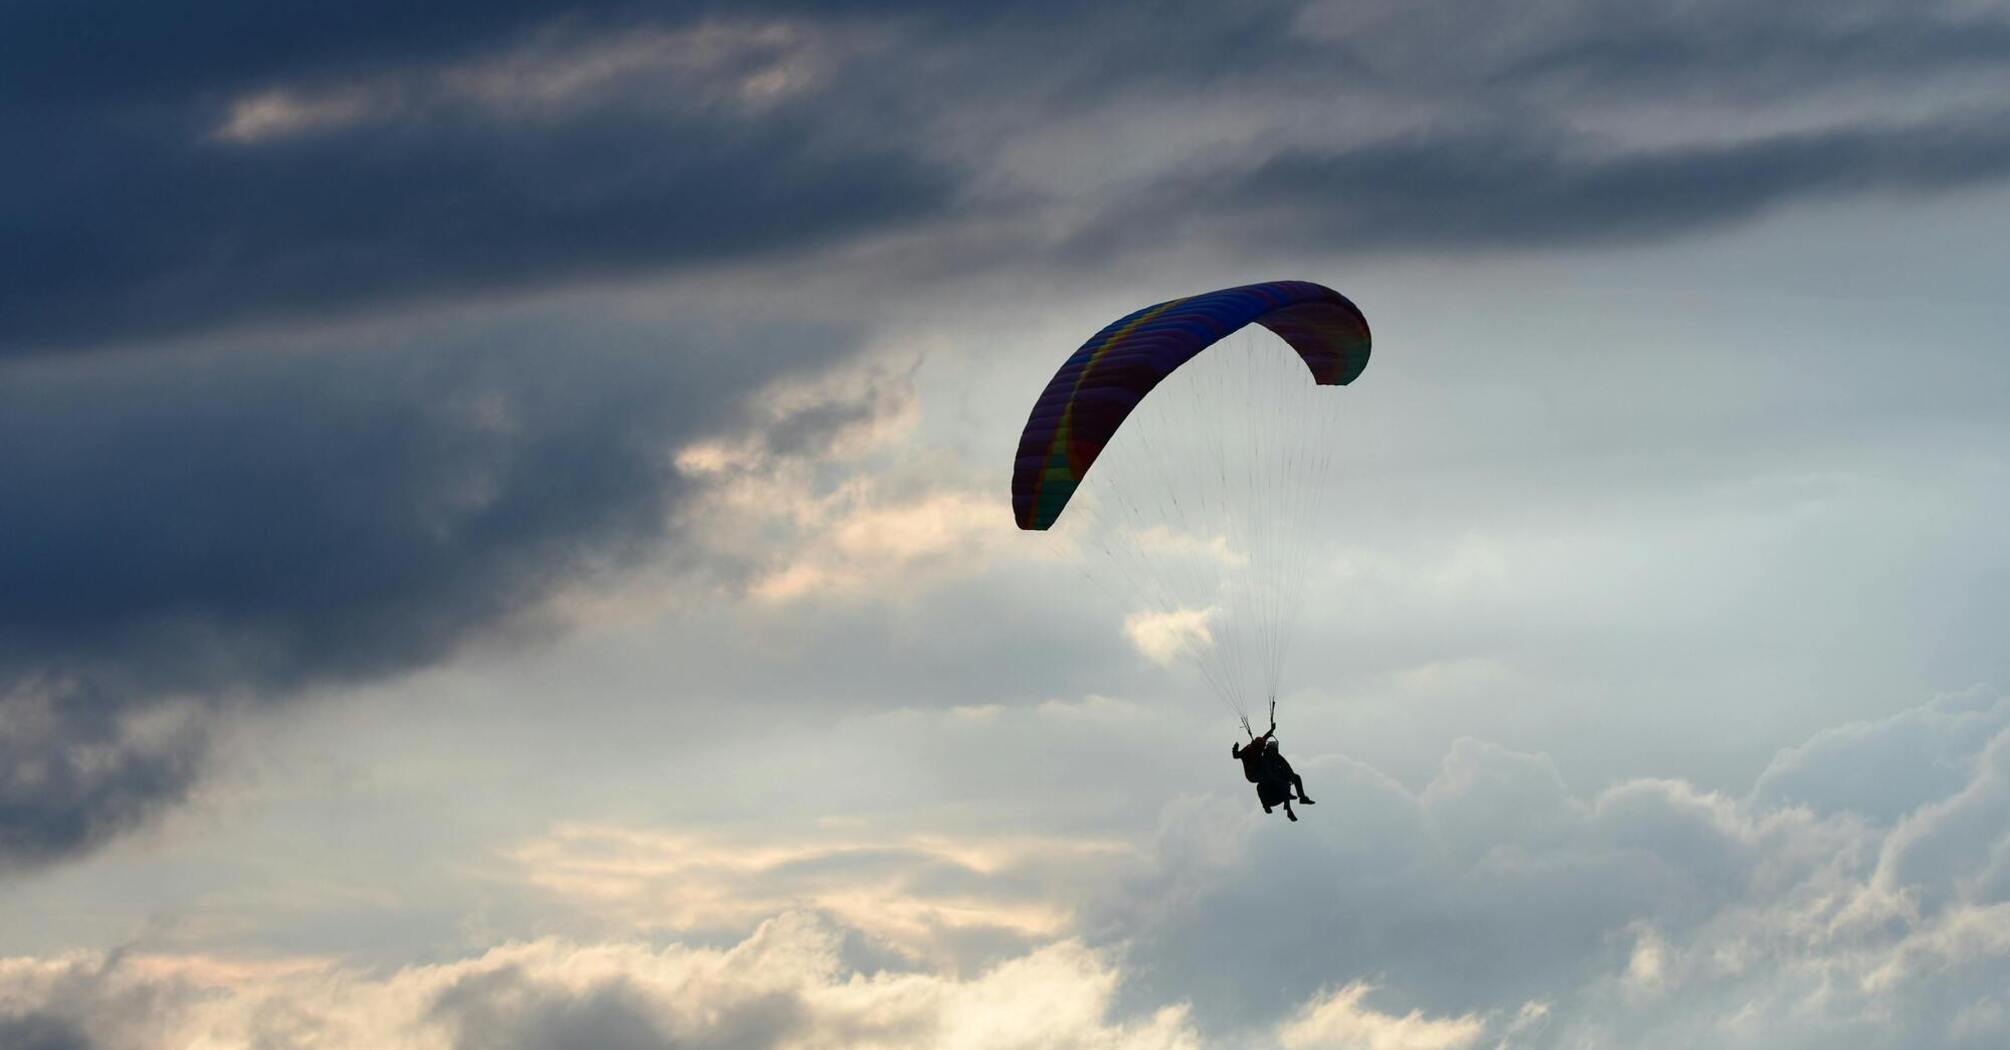 An American woman claimed that one question from the parachute instructor spoiled her impression of skydiving in New Zealand